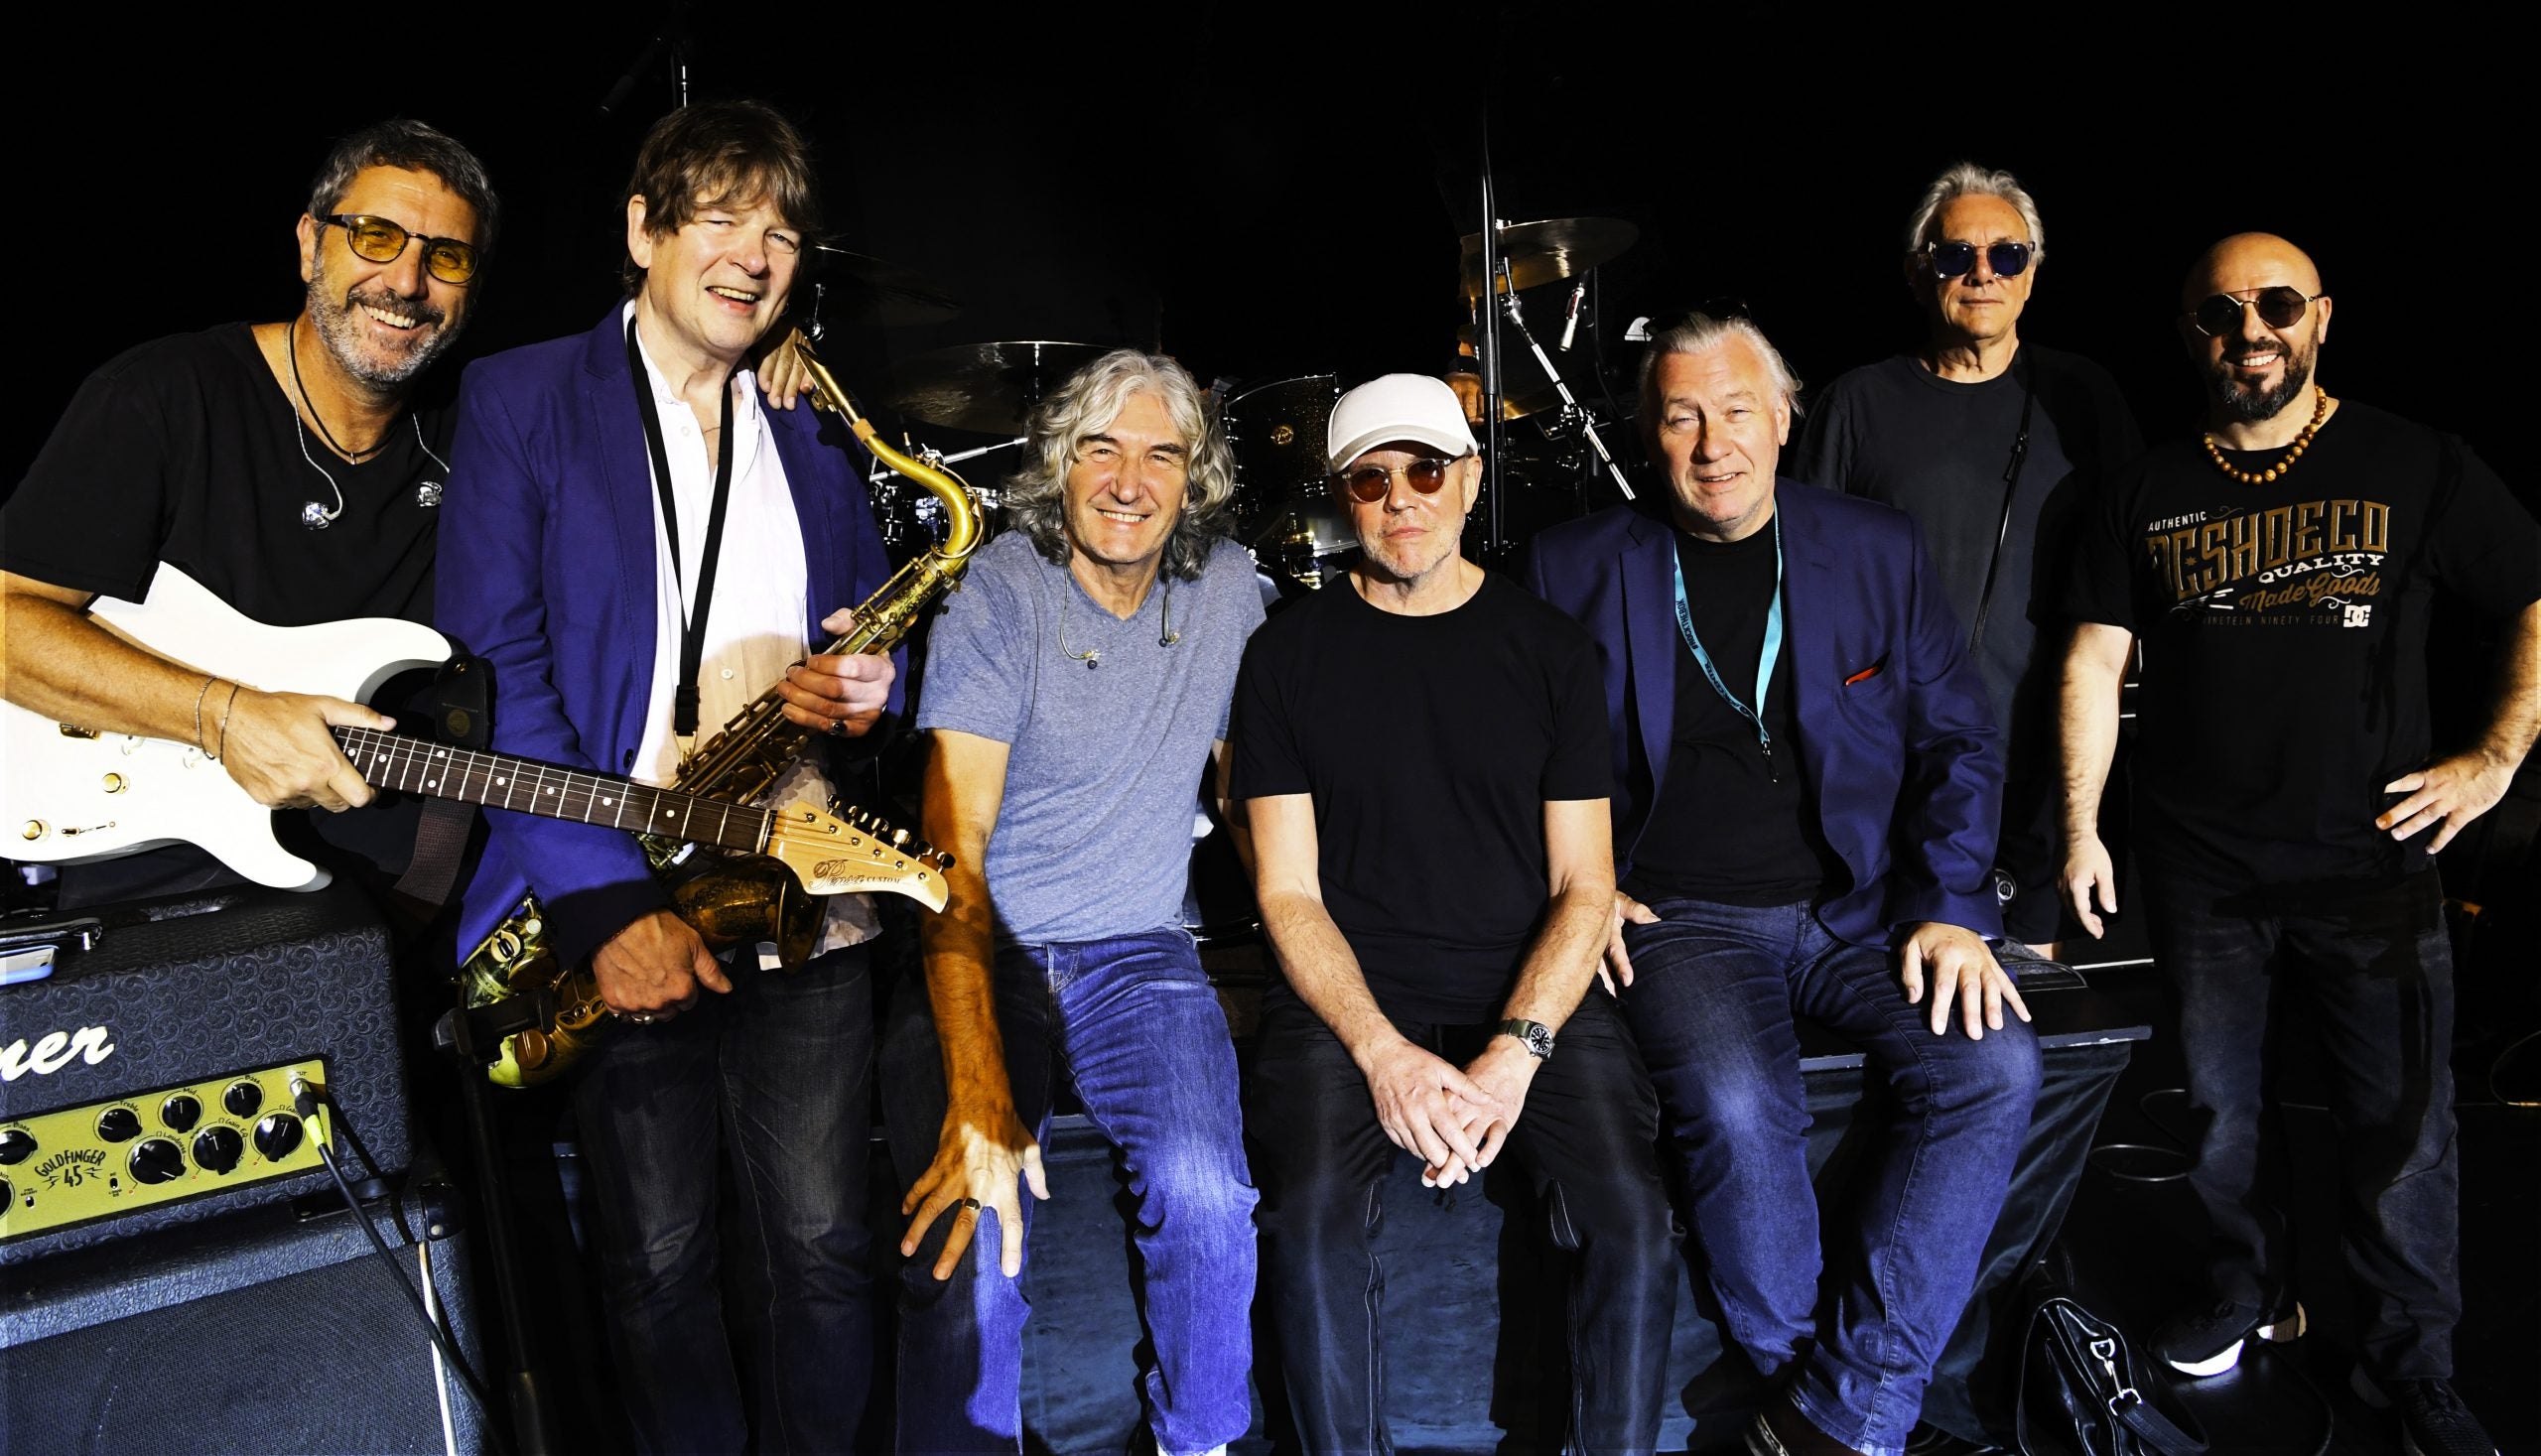 DSL* Dire Straits Legacy in Atlantic City promo photo for Exclusive presale offer code